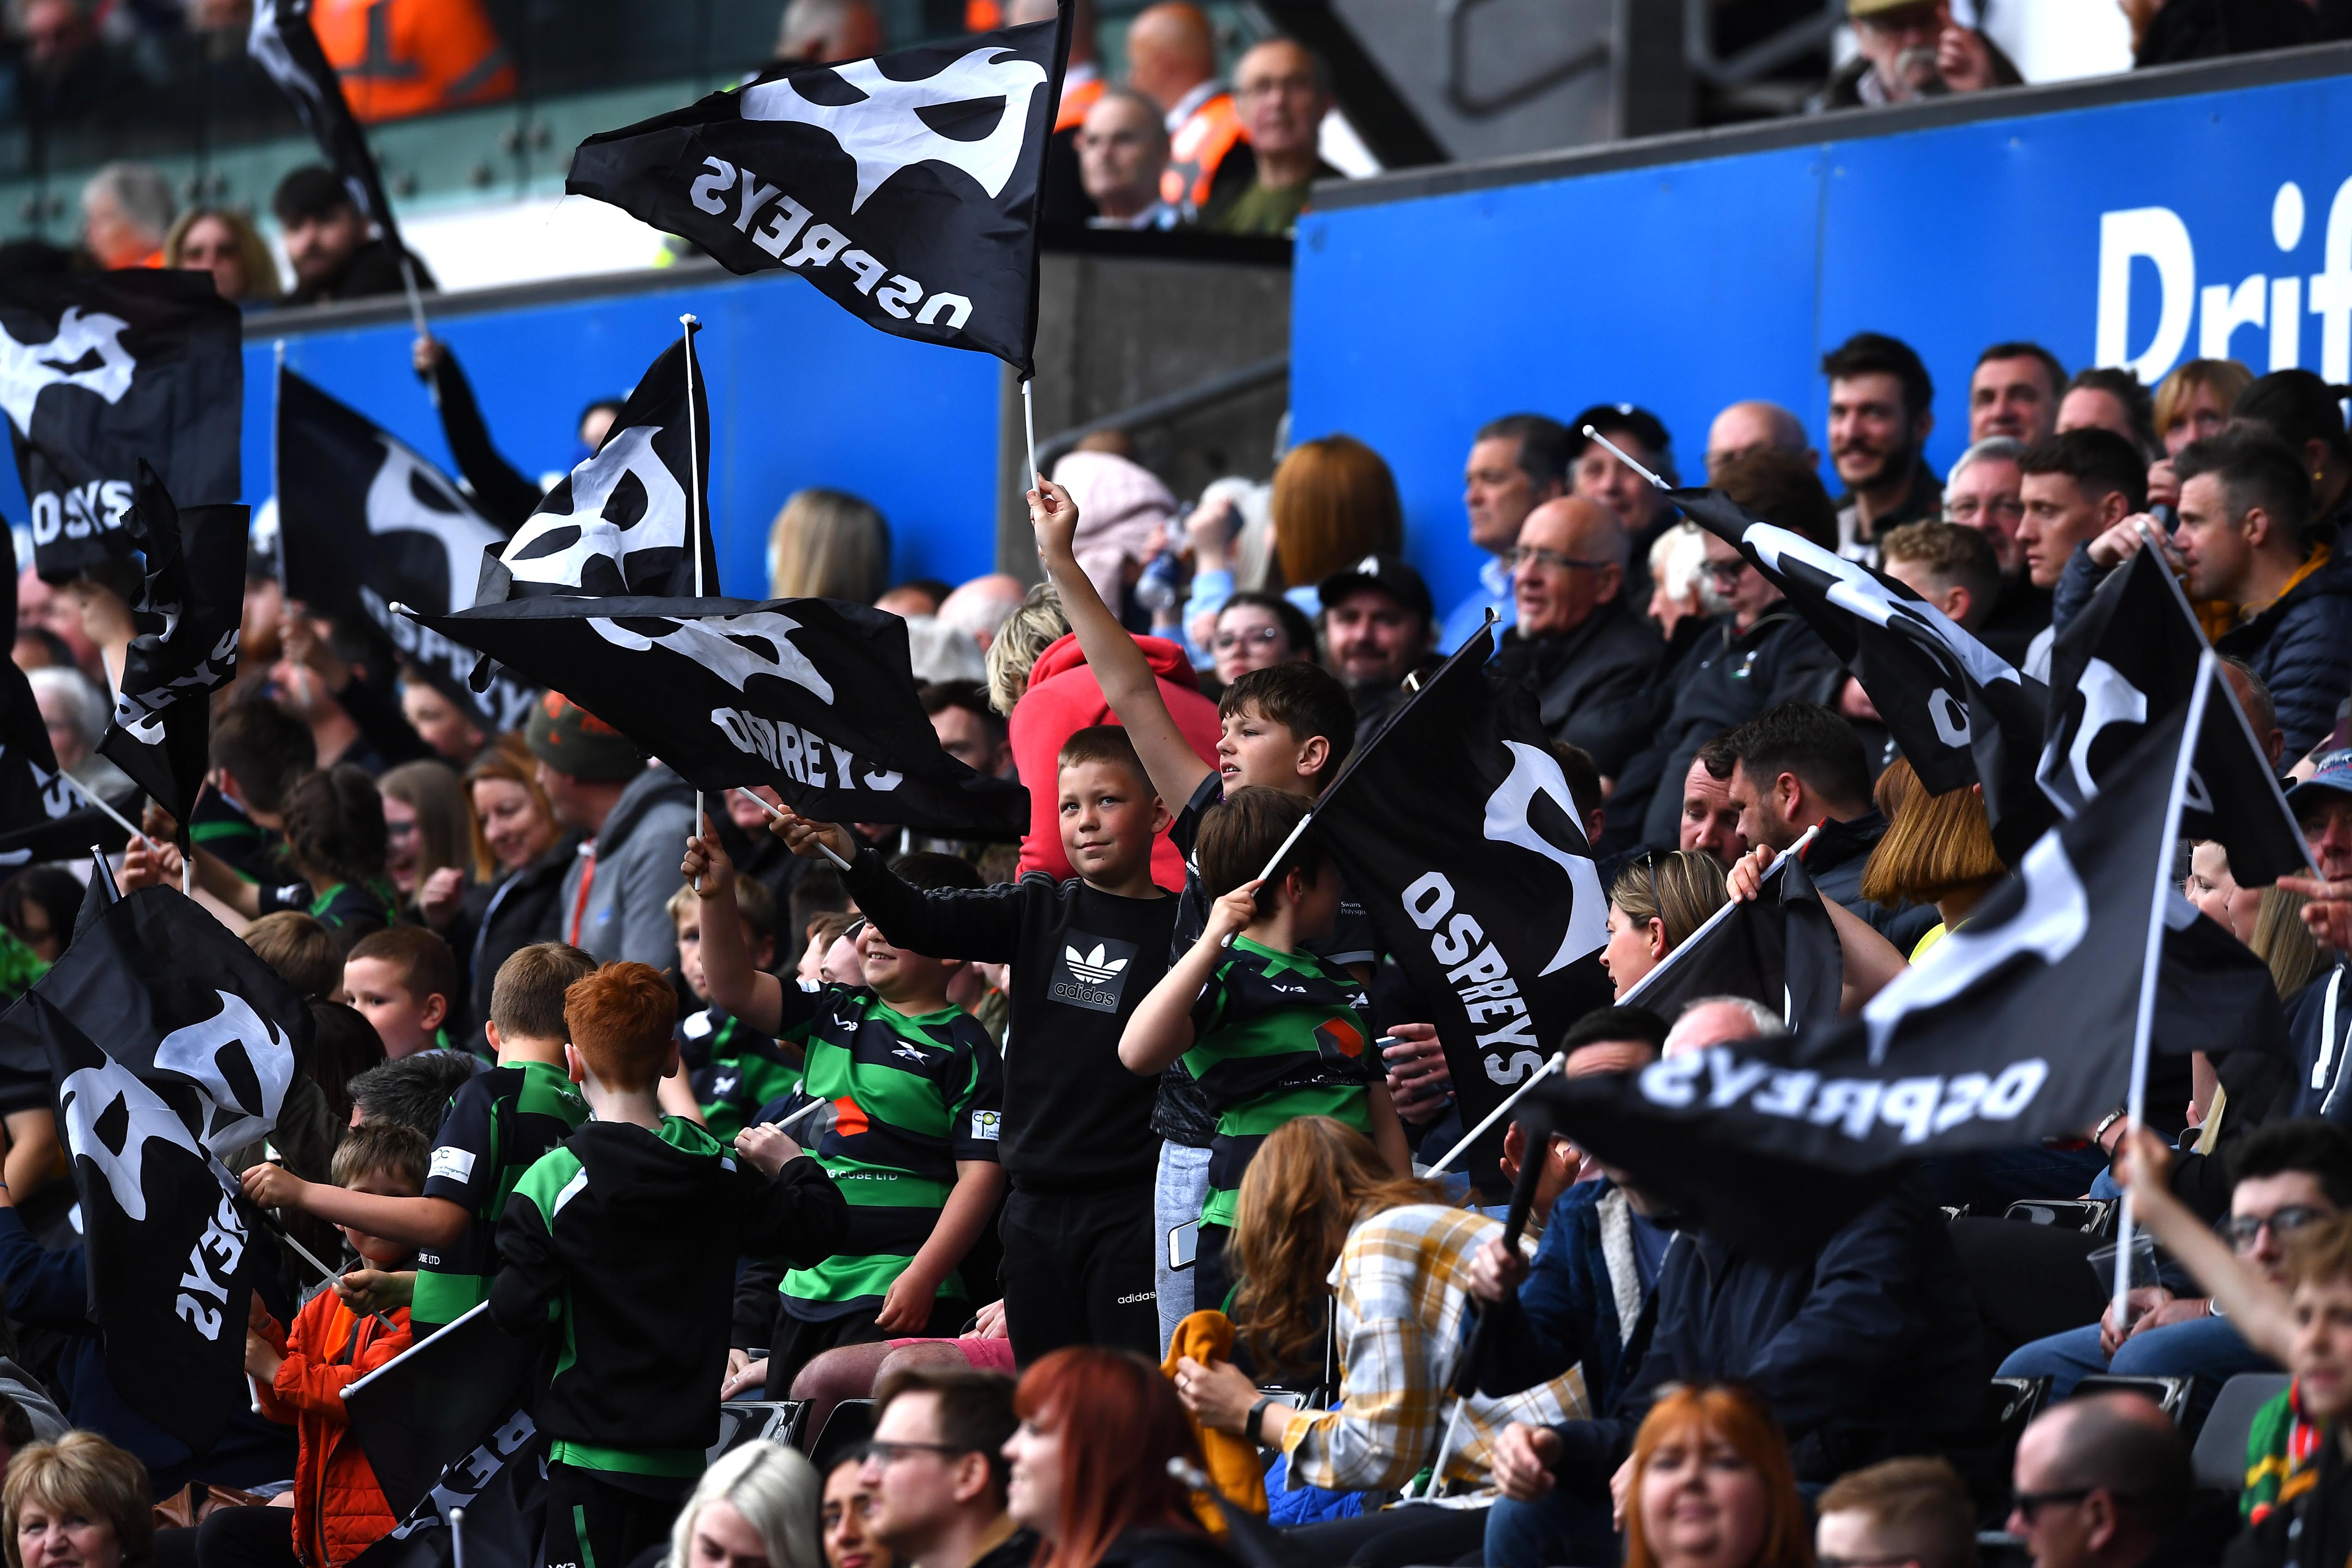 Ospreys Supporters 